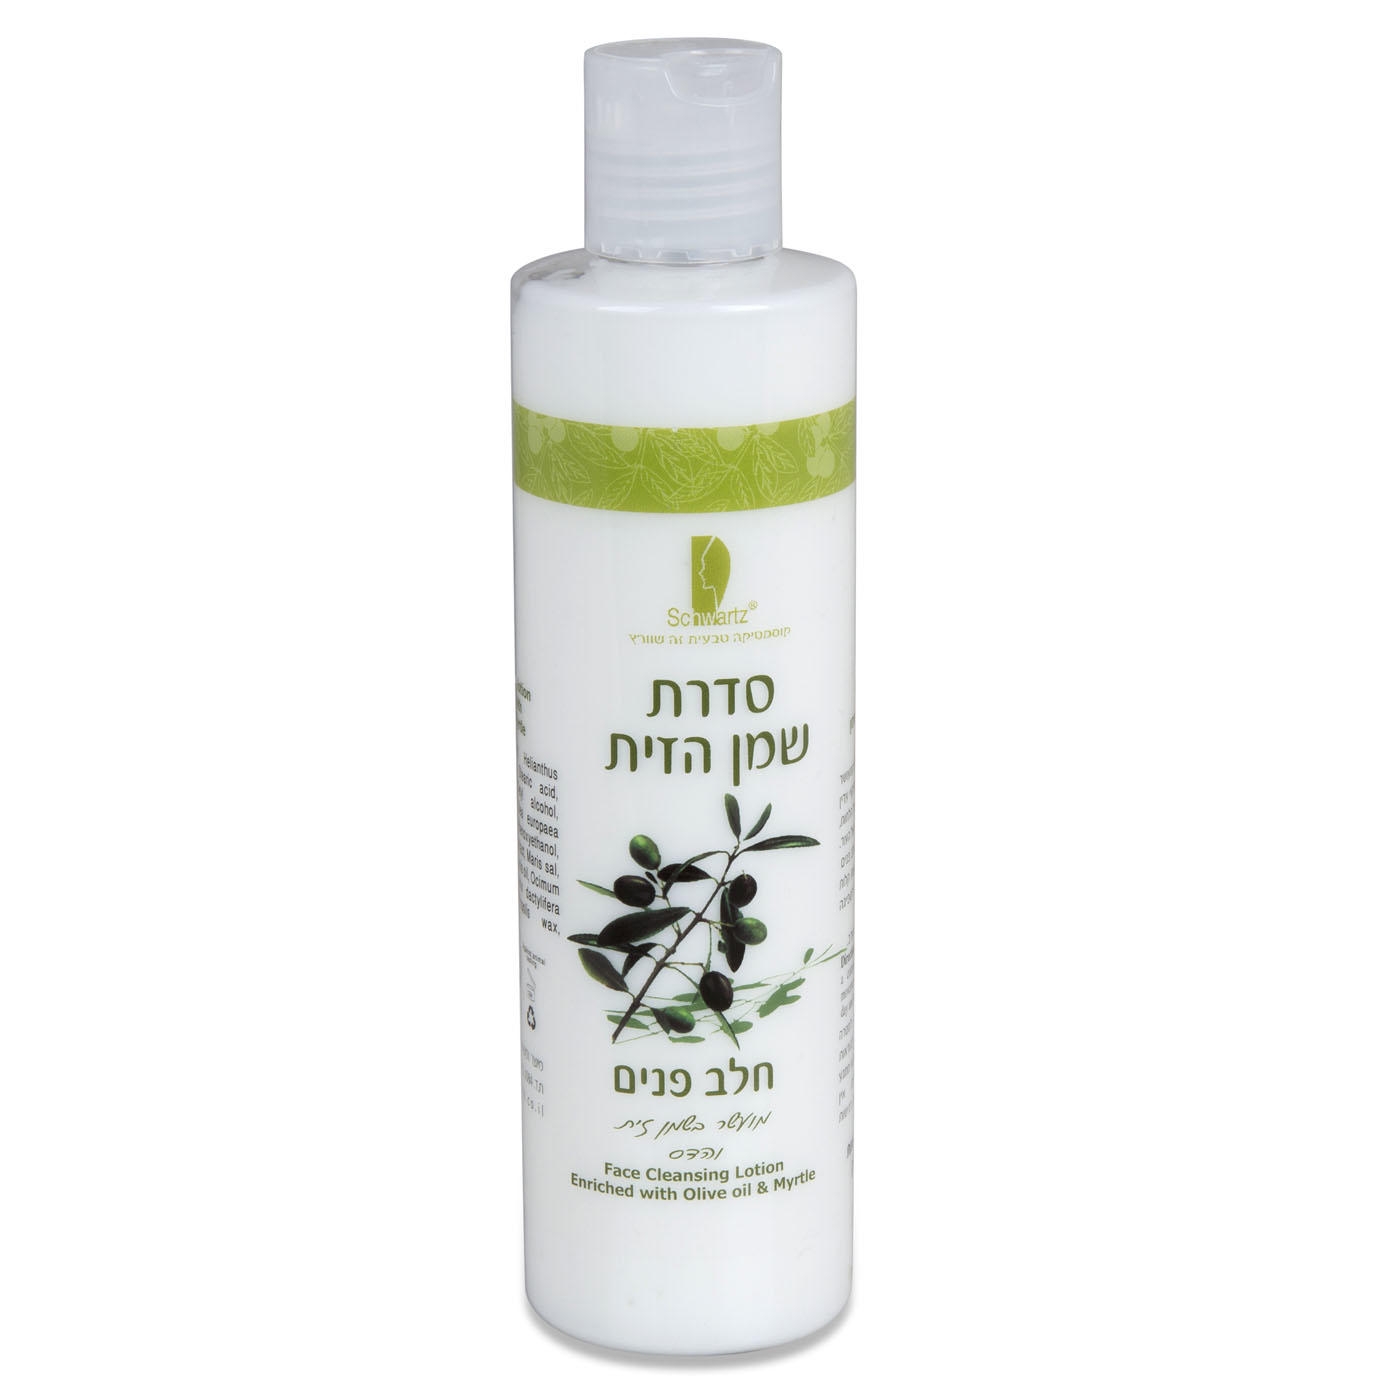 Schwartz Olive Oil and Myrtle Face Cleansing Lotion - 1